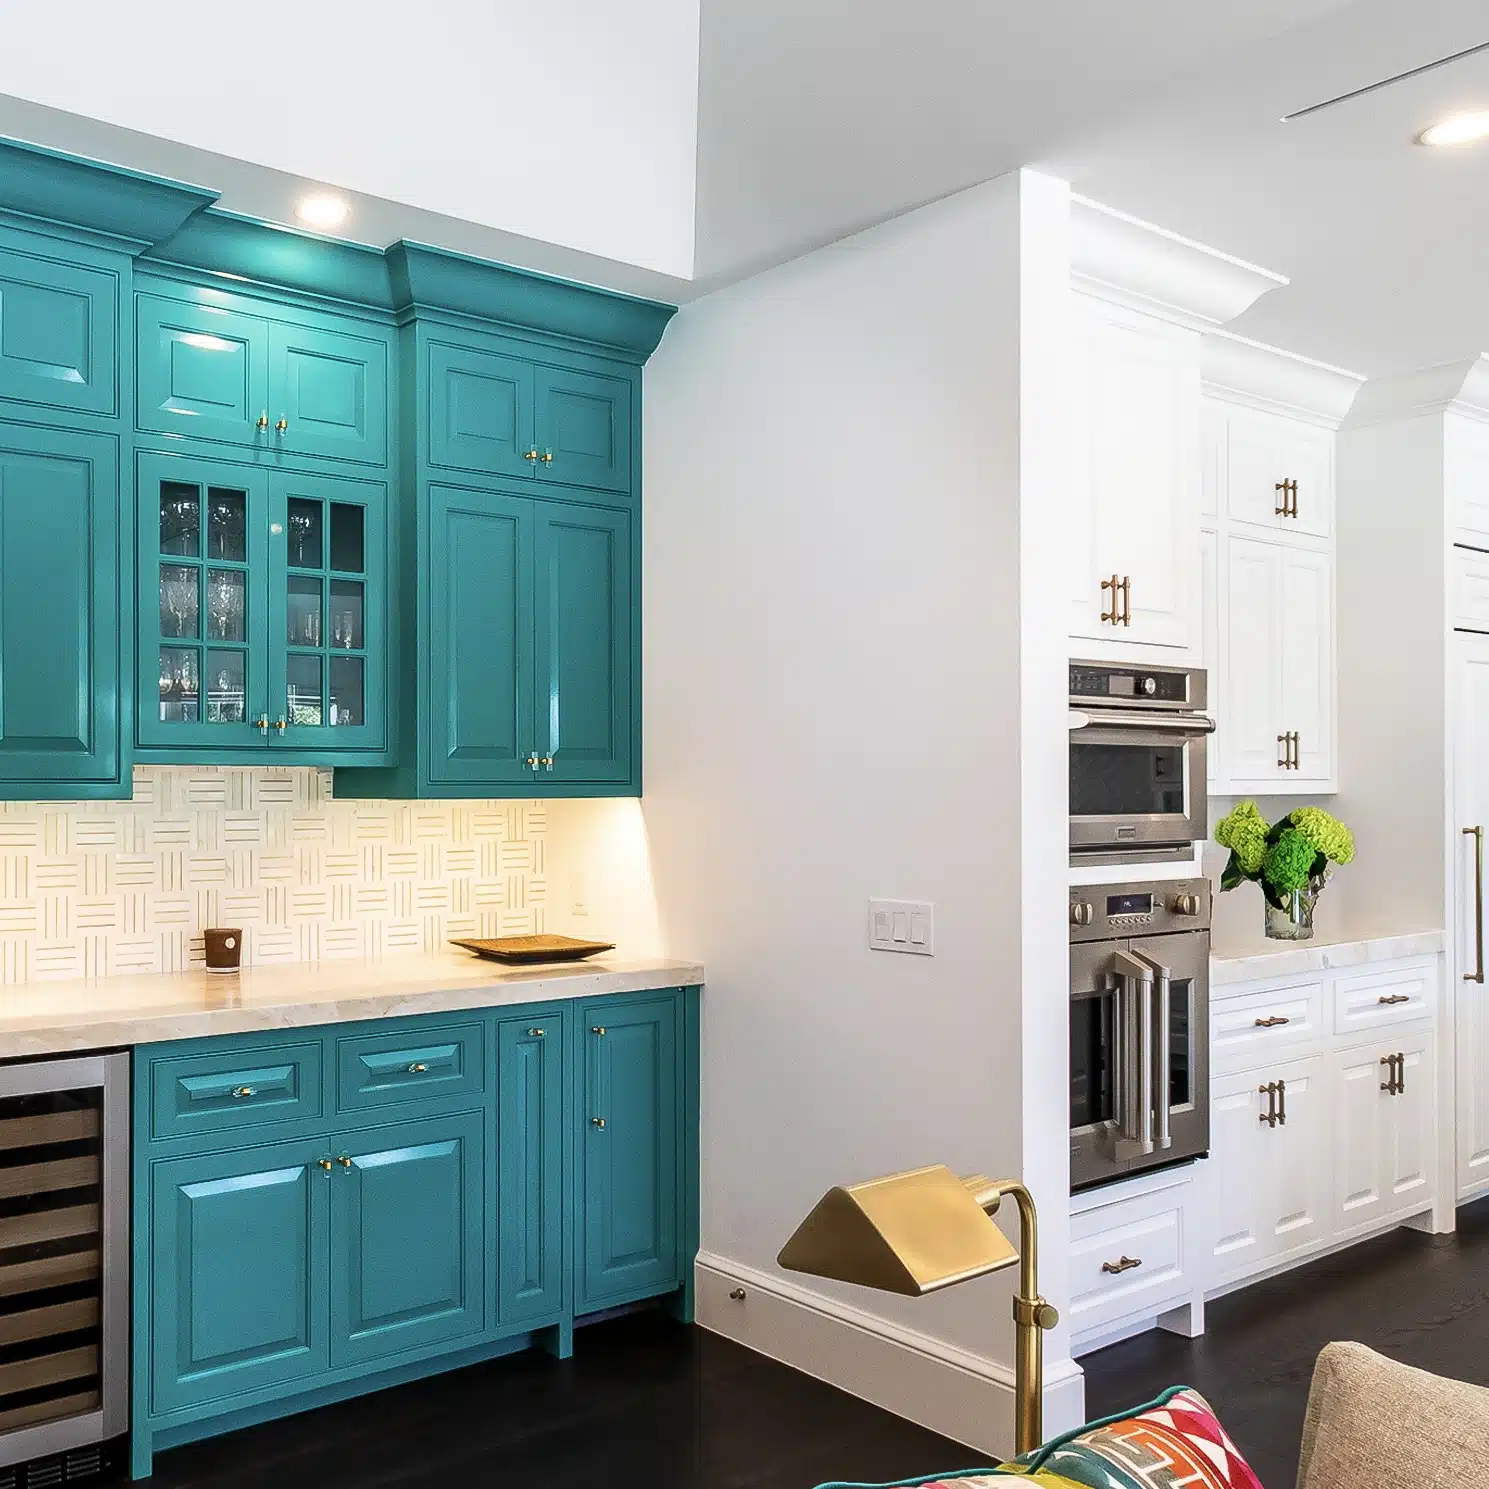 Teal and white cabinets